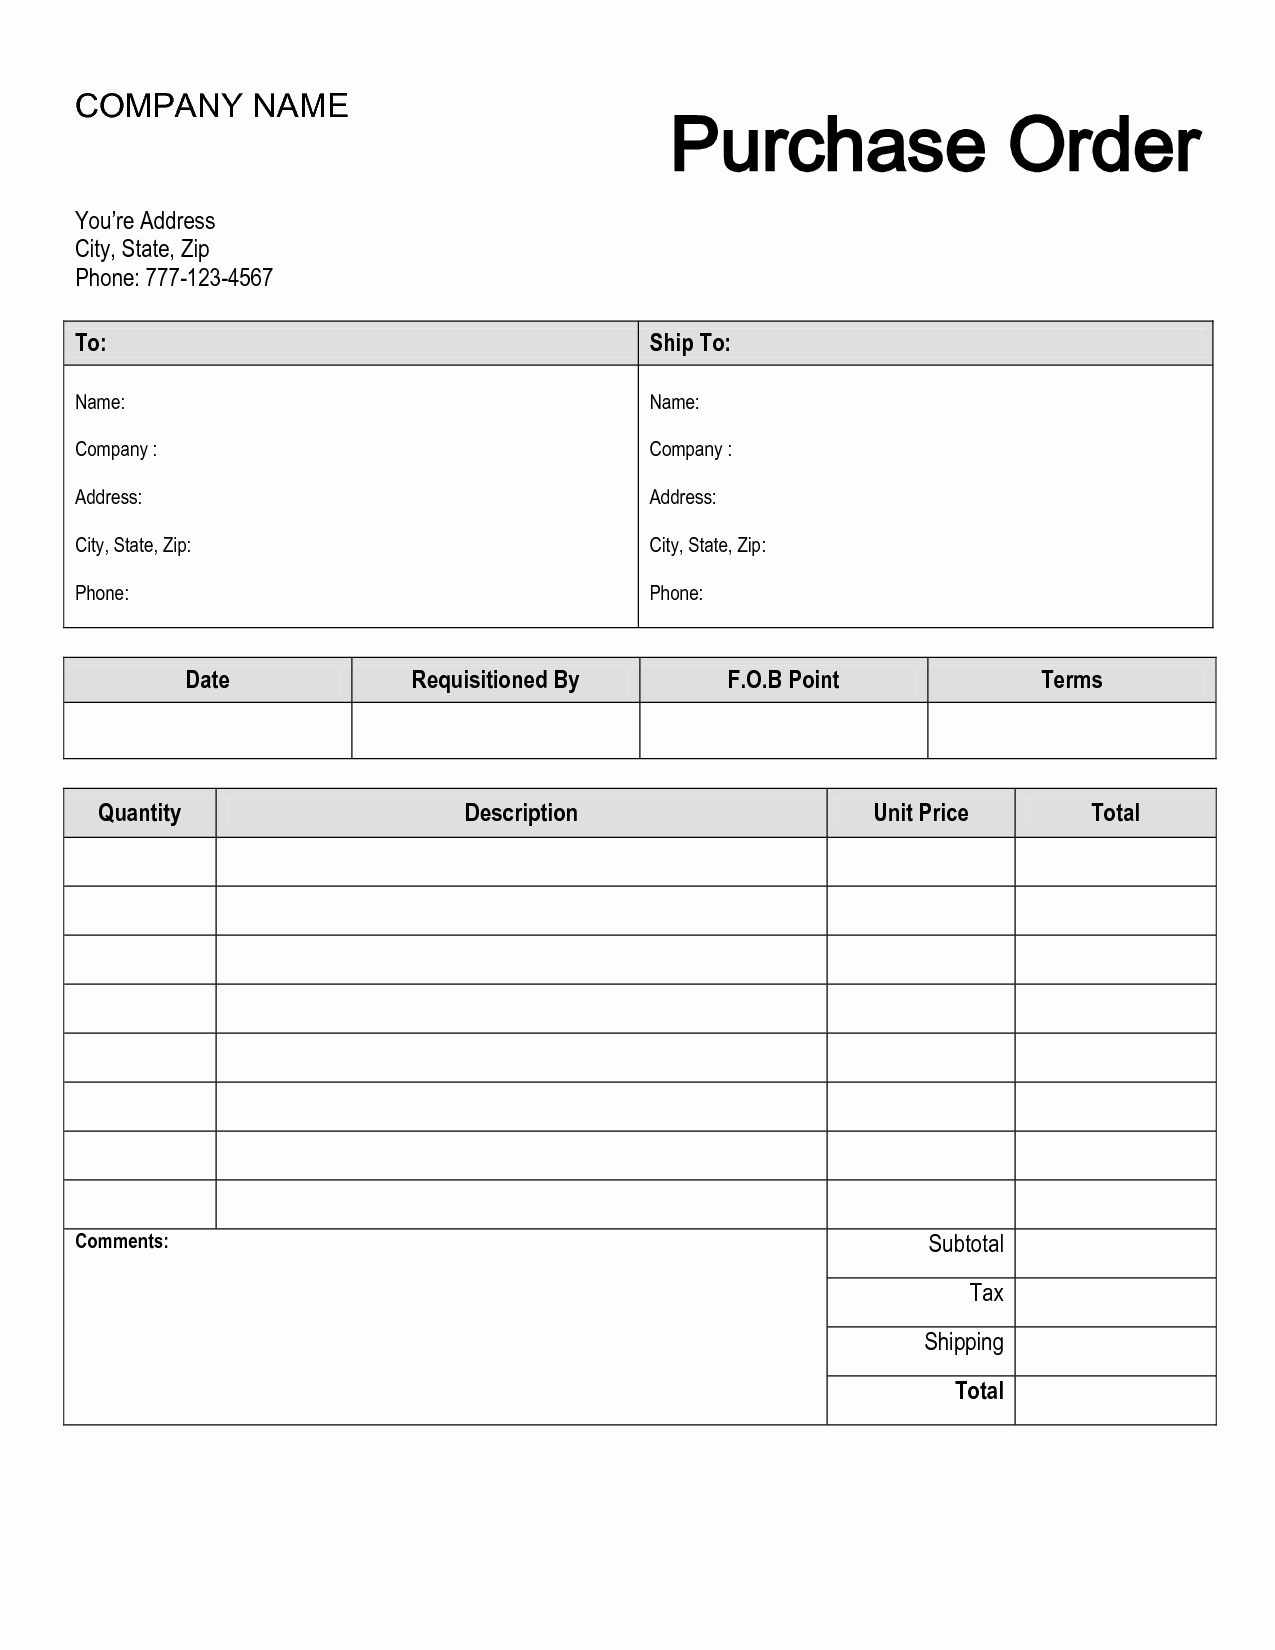 Purchase Request form Template Beautiful 15 Samples Of Purchase order Templates In Word Excel